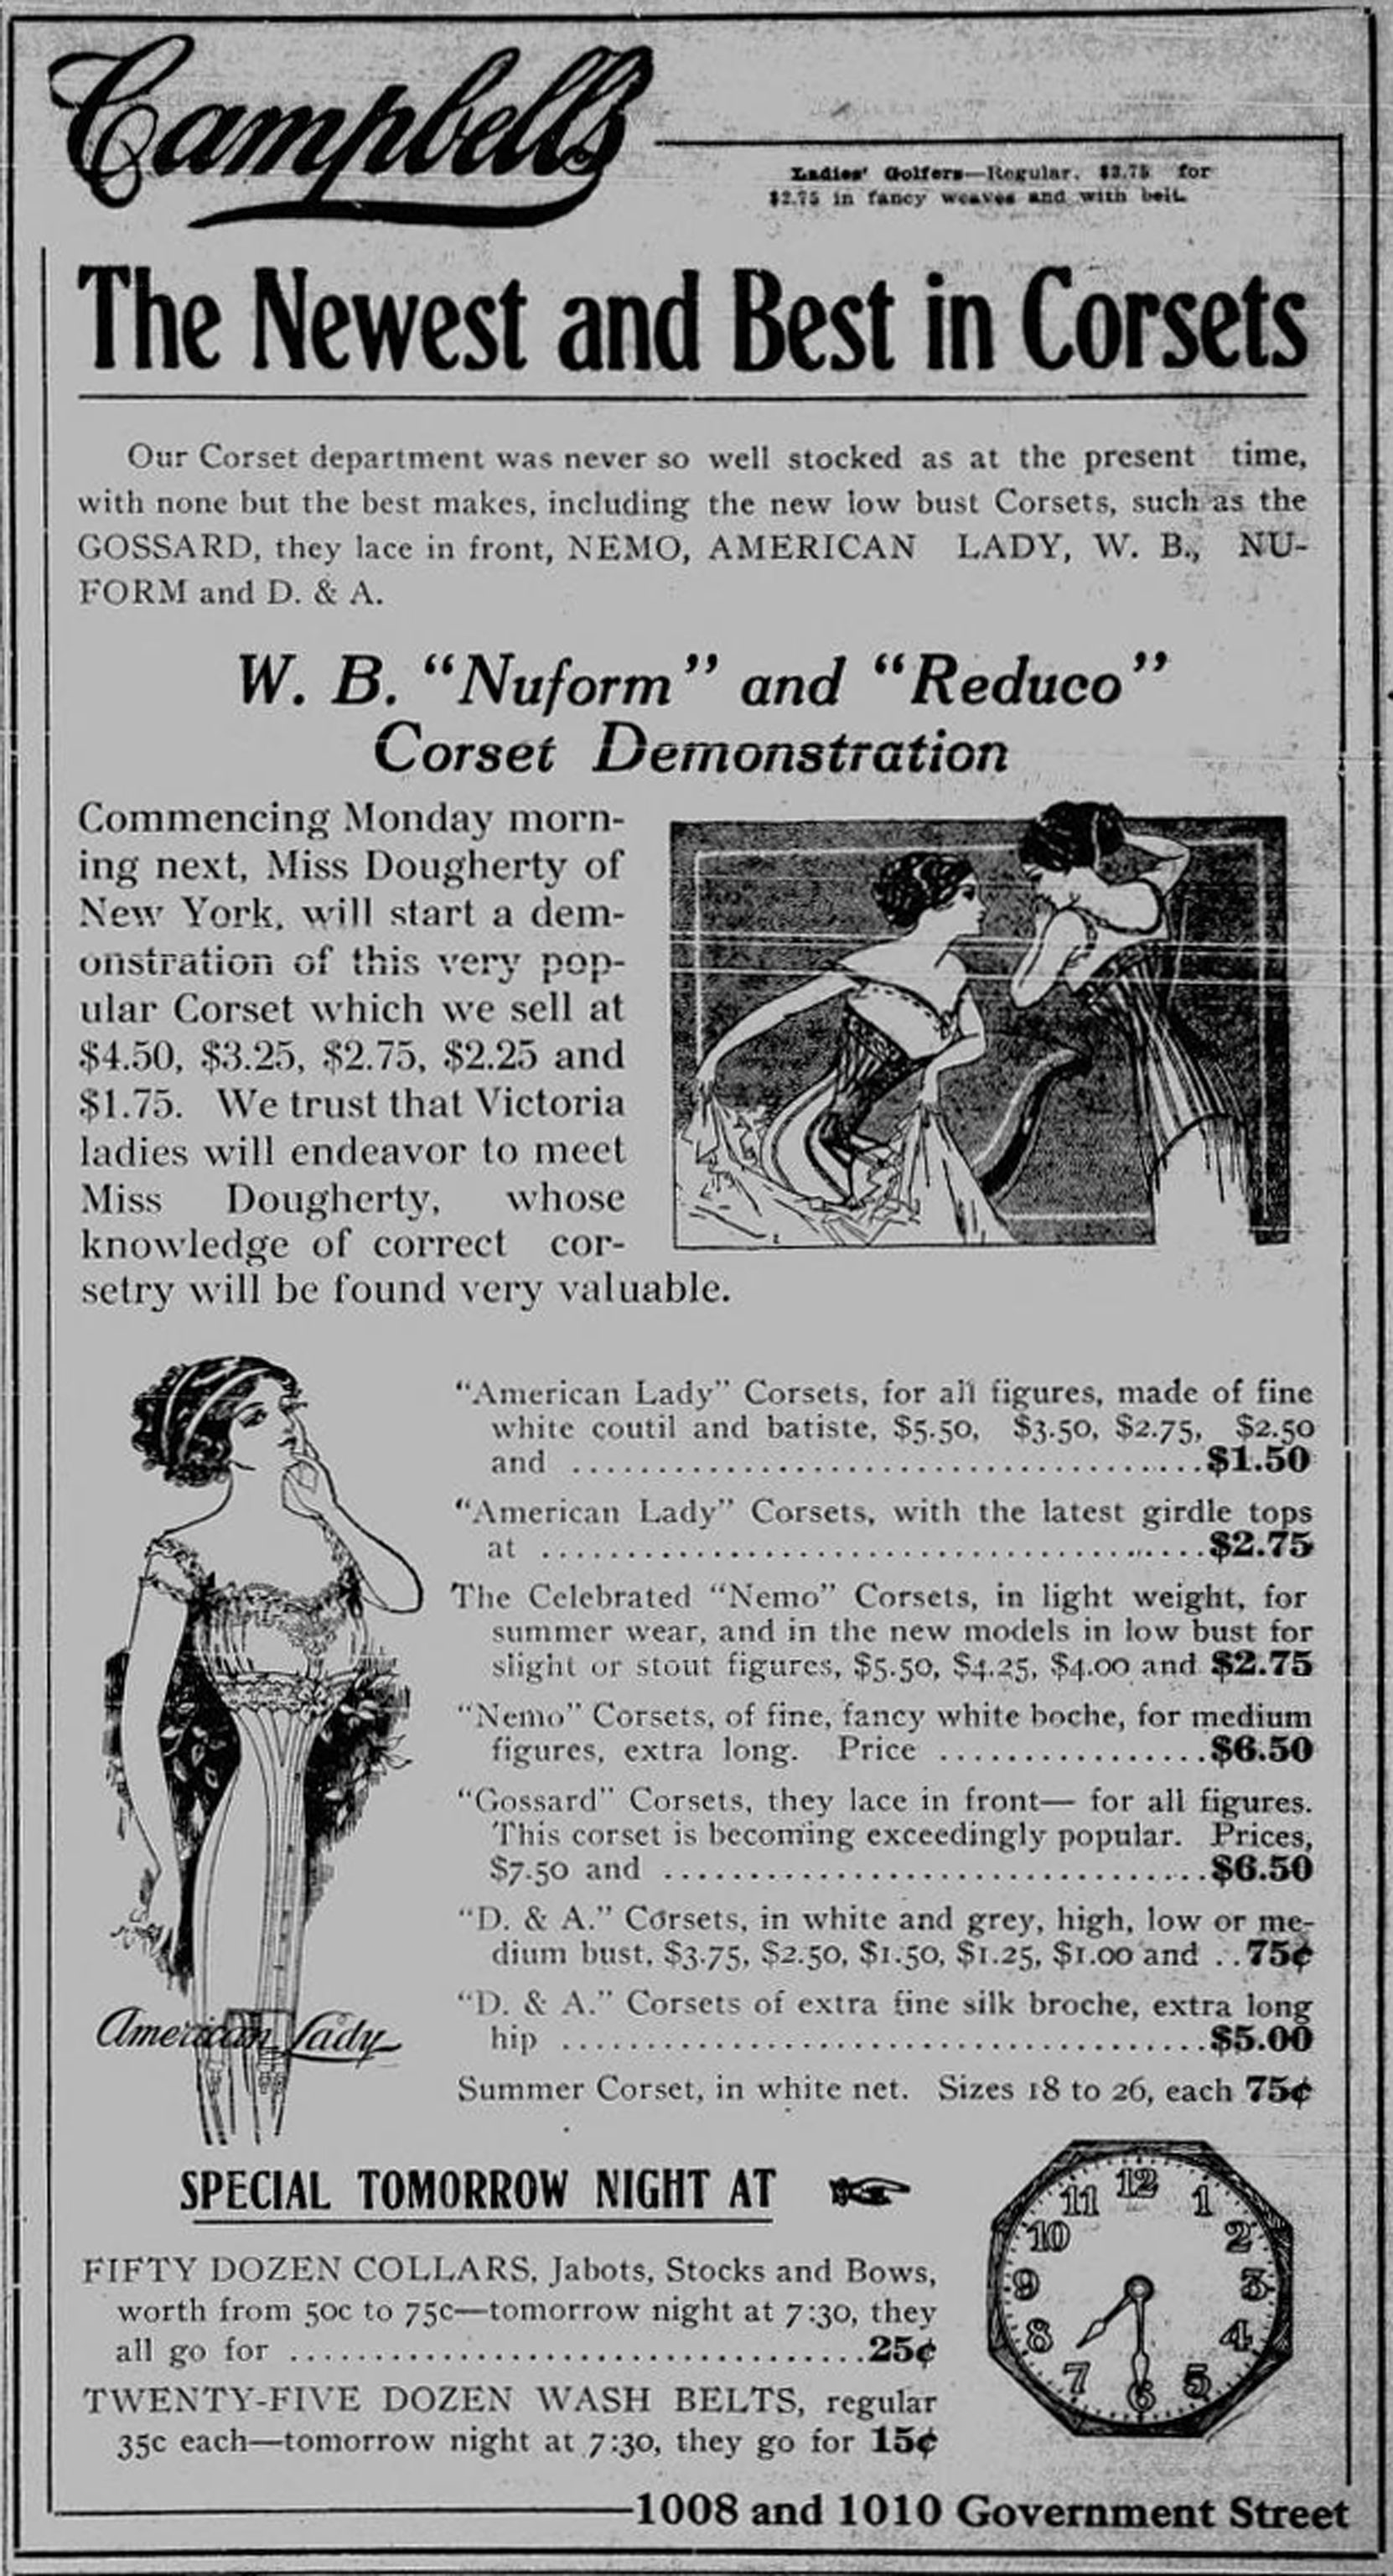 1911 advertisement for corsets by Angus Campbell, a women's clothing store located at 1010 Government Street for several decades. (Victoria Online Sightseeing Tours collection)